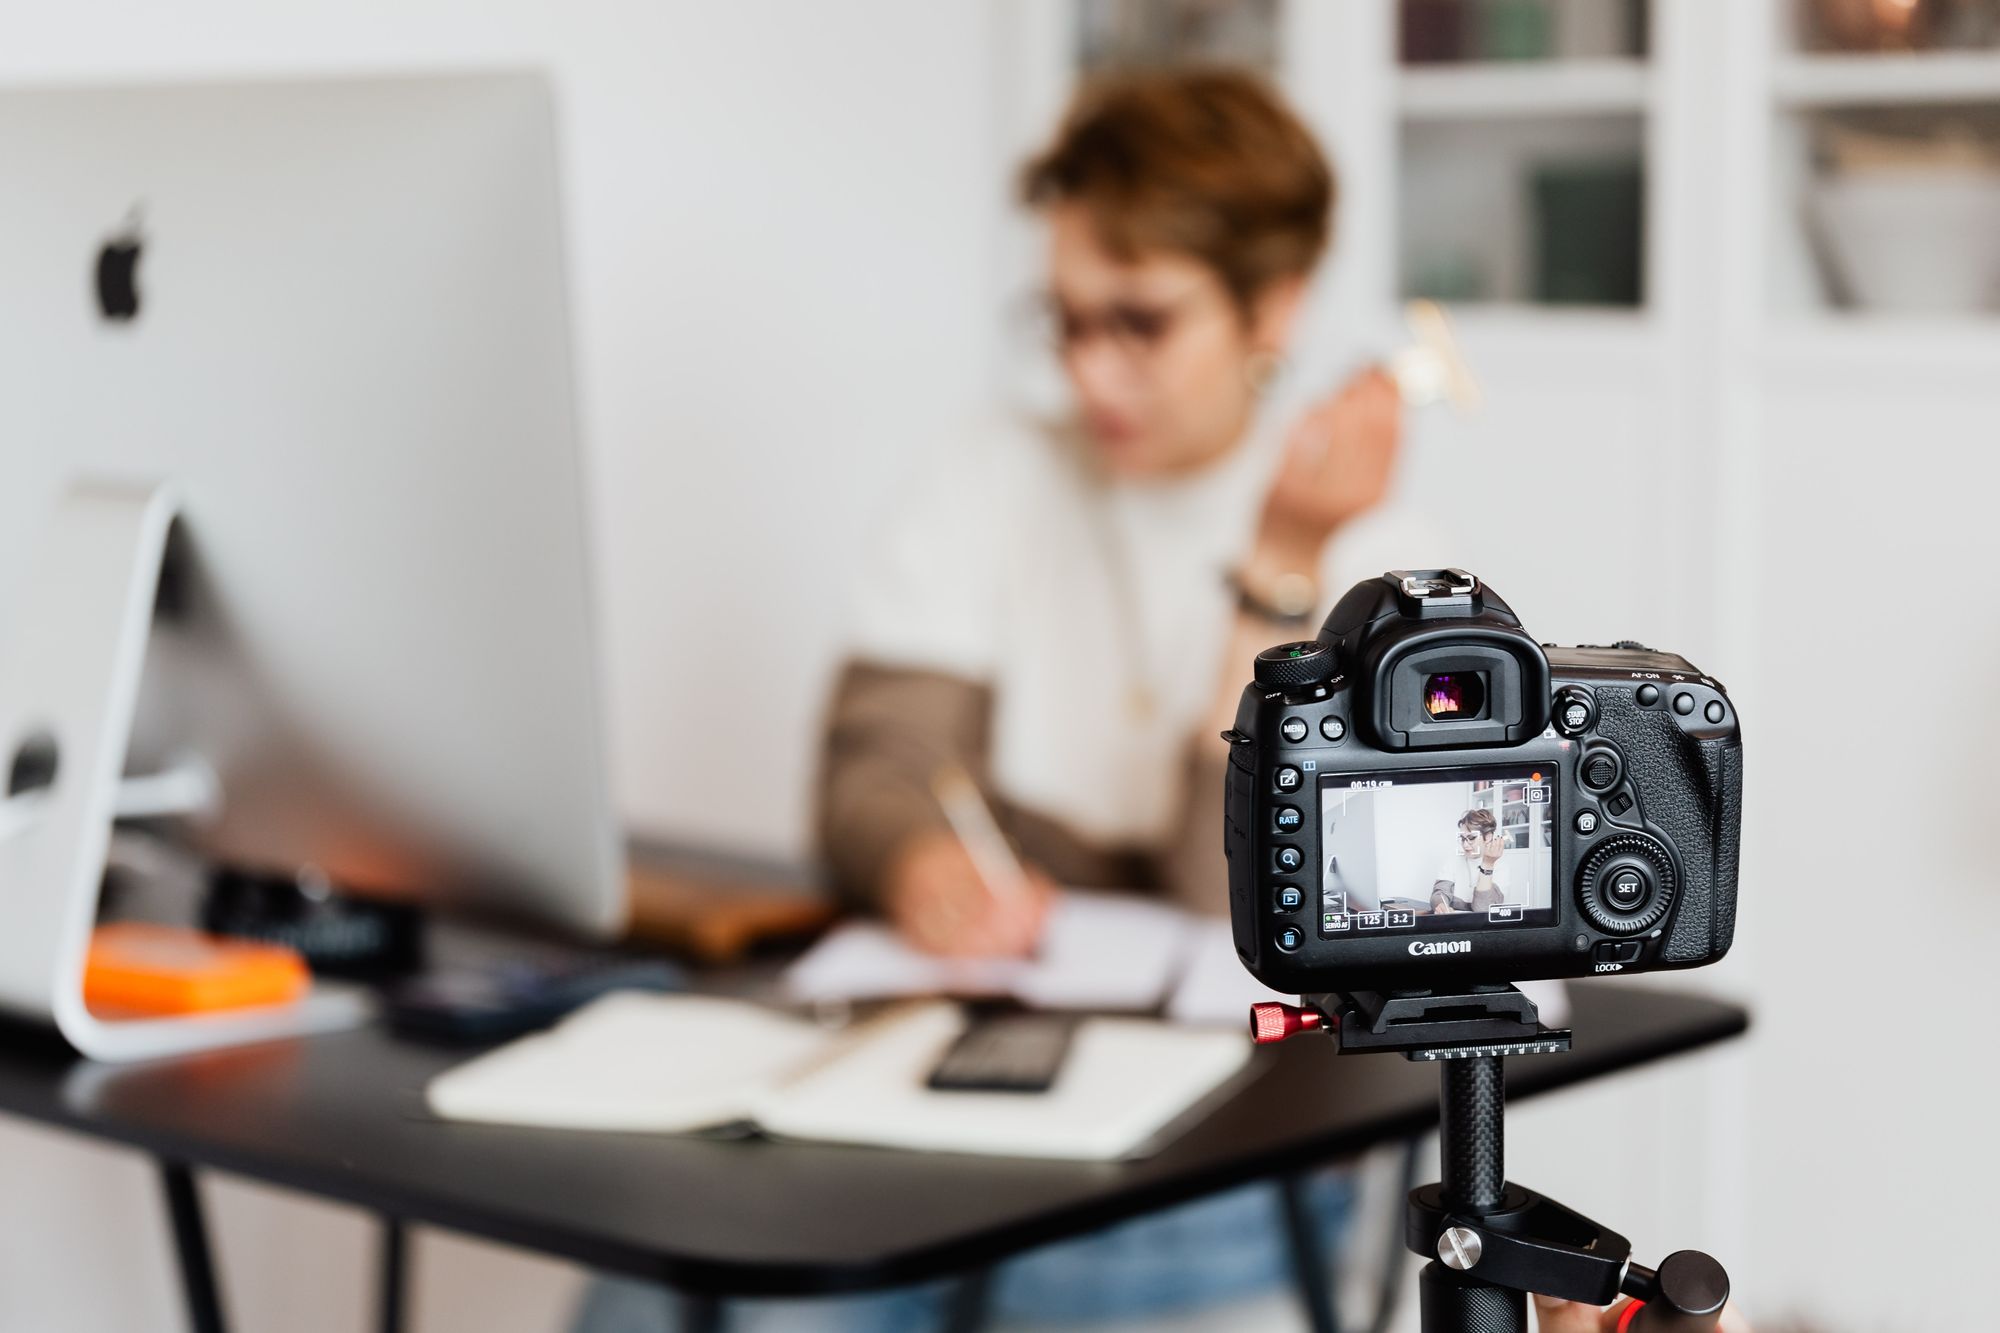 The 14 Types of B2B Marketing Videos Your Company Needs to Be Creating